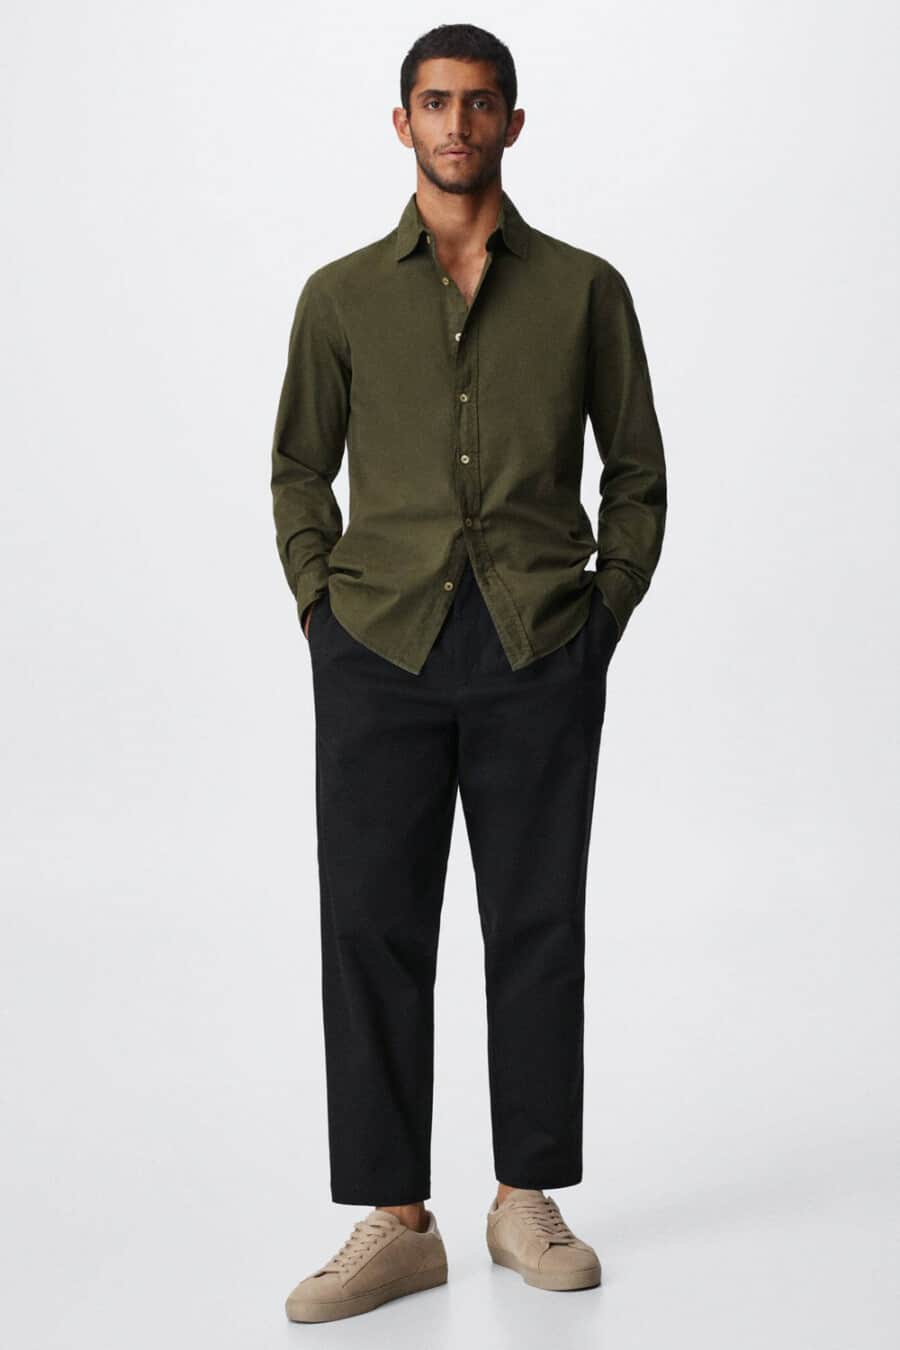 Men's loose black pants, dark green shirt and light brown suede sneakers outfit